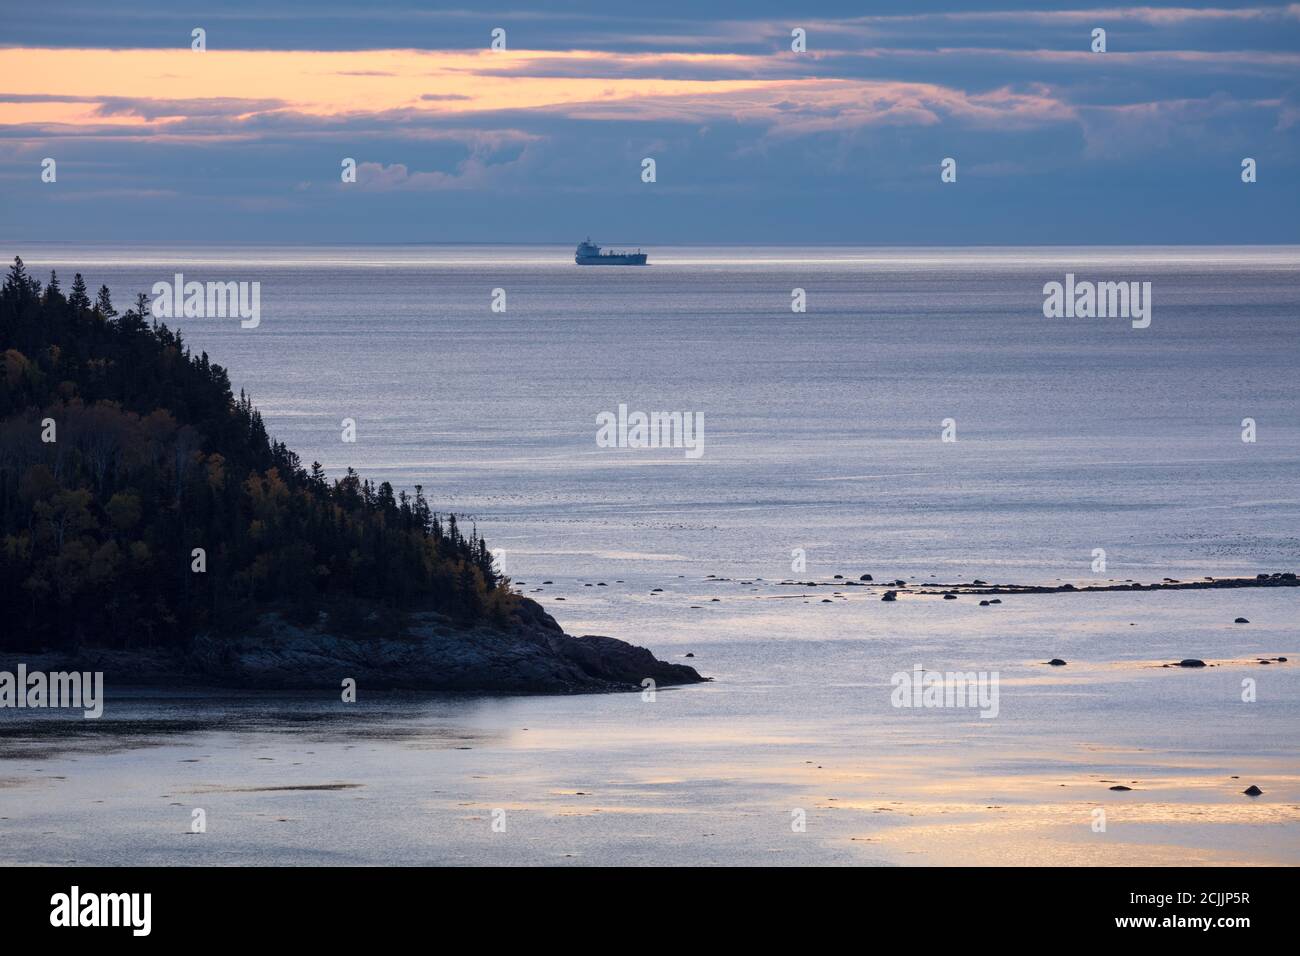 A ship (tanker) in the St Lawrence Estuary at dawn from Tadoussac, Quebec, Canada Stock Photo